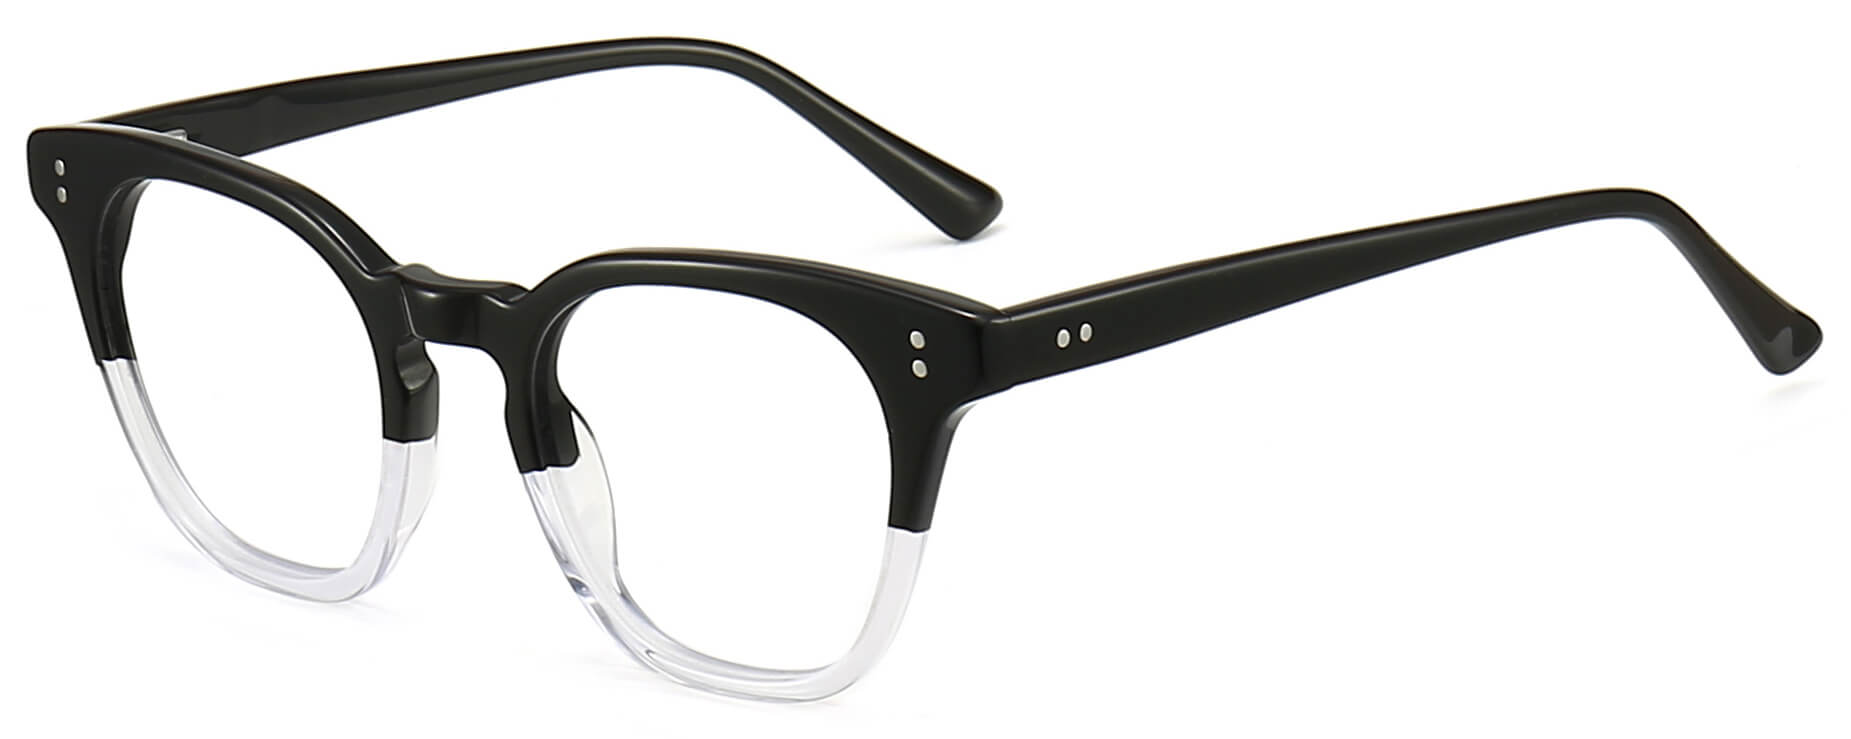 Clare Cateye Black Eyeglasses from ANRRI, angle view